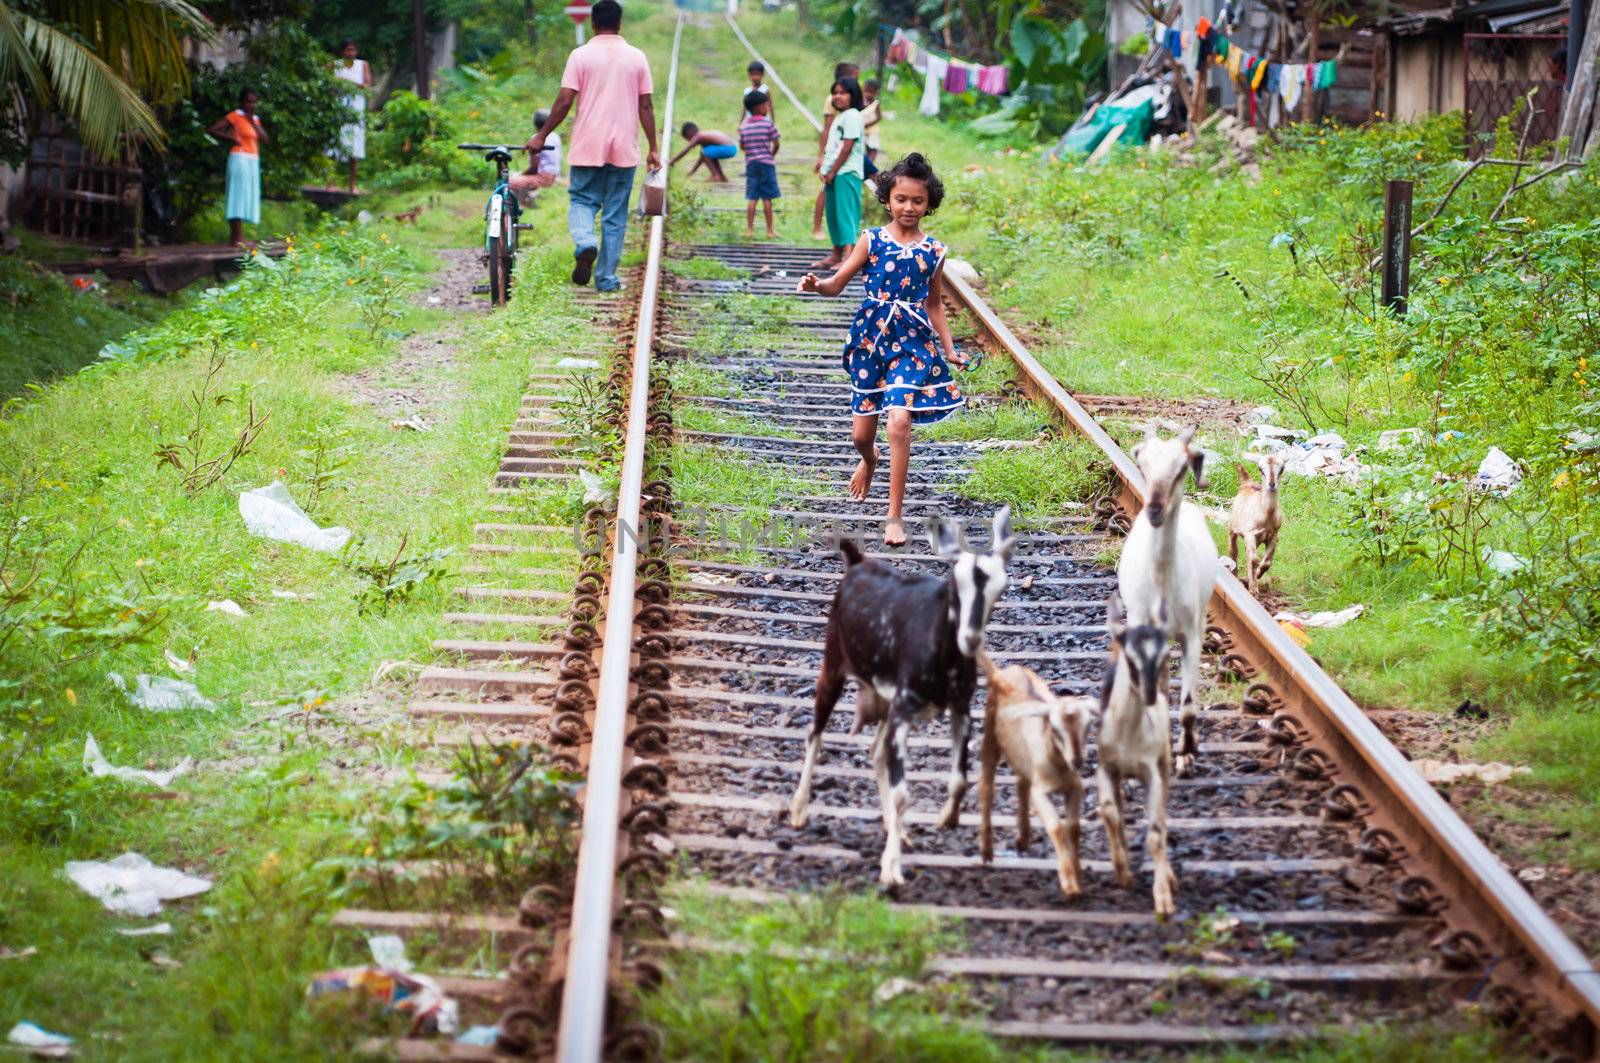 Bendota, Sri Lanka - December 16, 2011: Smiling Sri Lankian carefree girl in dress is running on railway lines with goats on front and playing children on background. Selective focus on the girl.